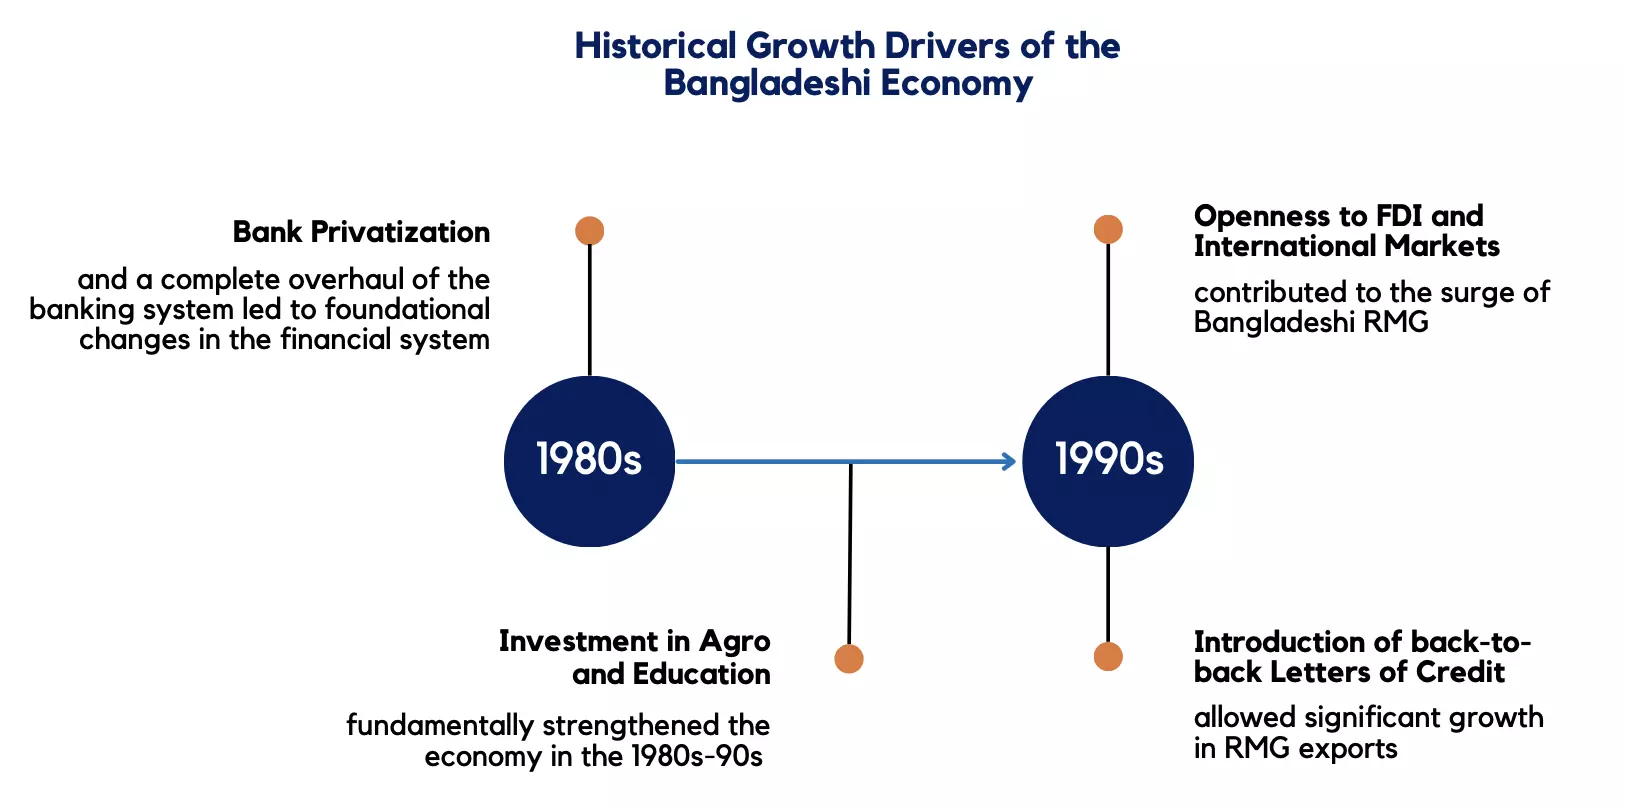 Historical growth drivers of the Bangladesh economy, in the decades of 1980s and 1990s